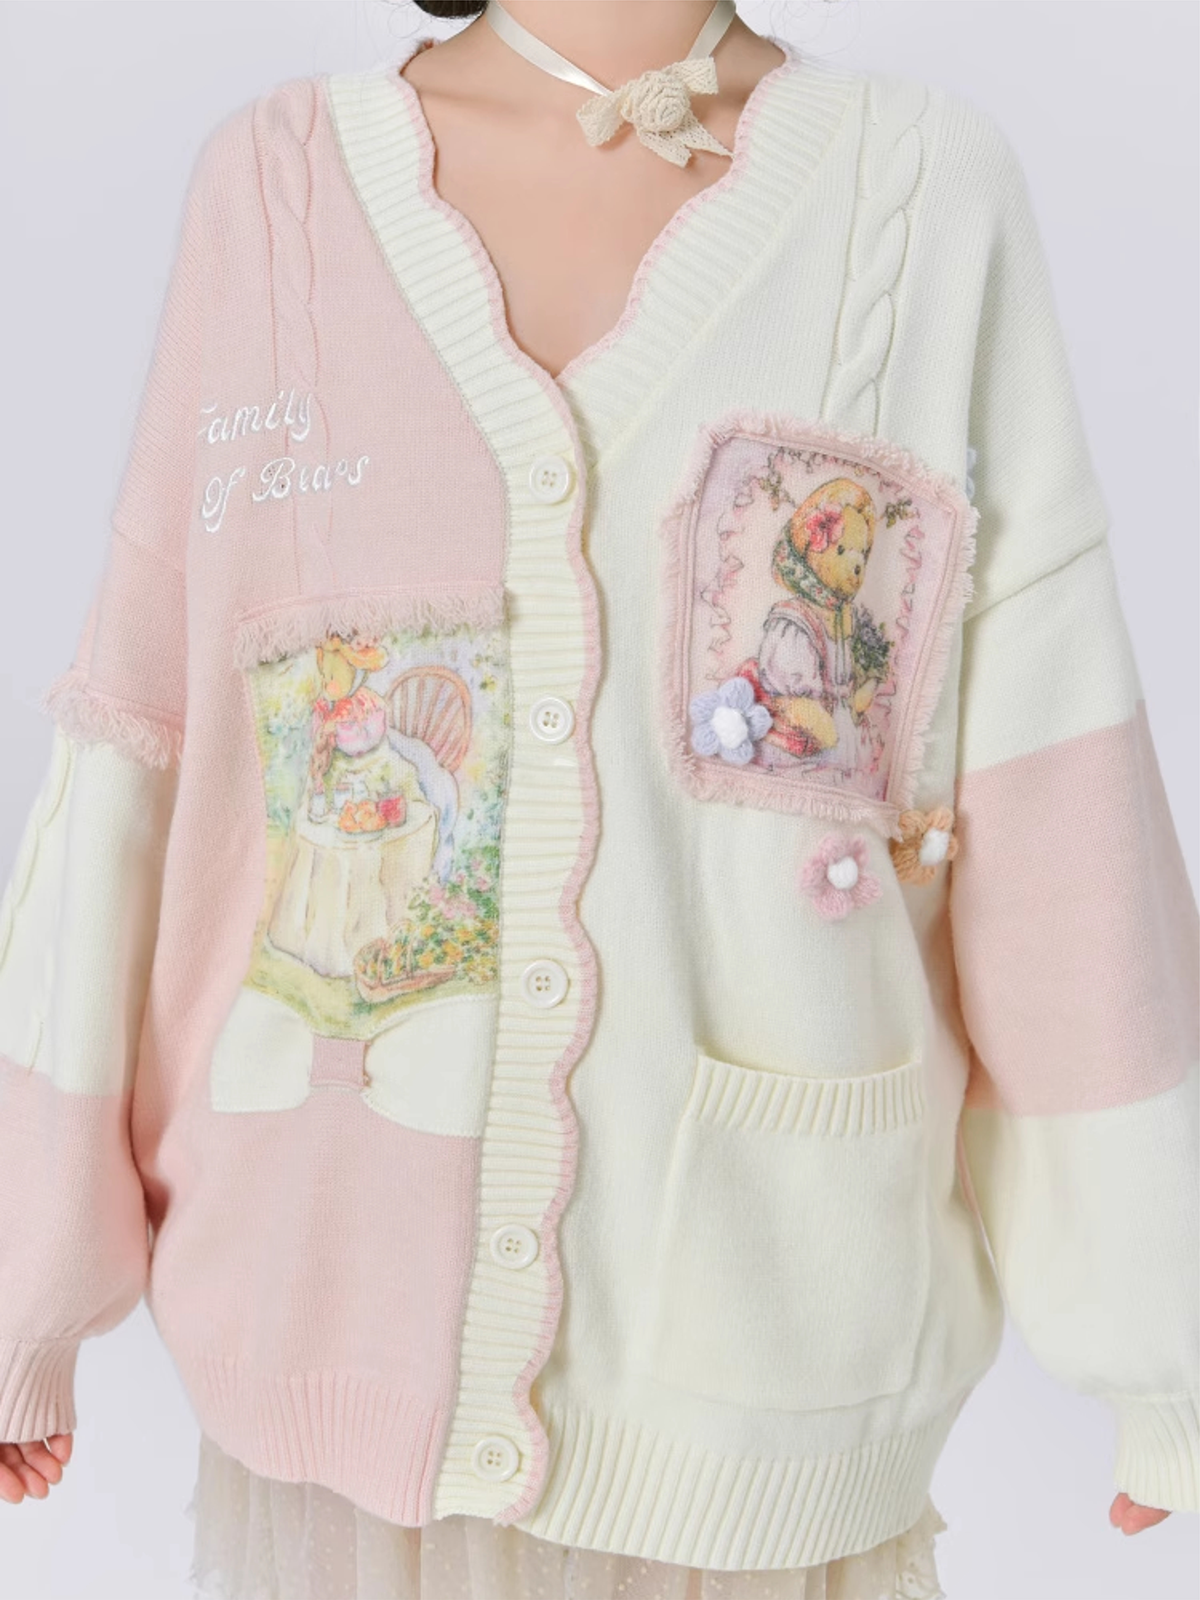 Soft and Cute Family of Bears Two-Tone Knitted Cardigan & Lace Collar-ntbhshop